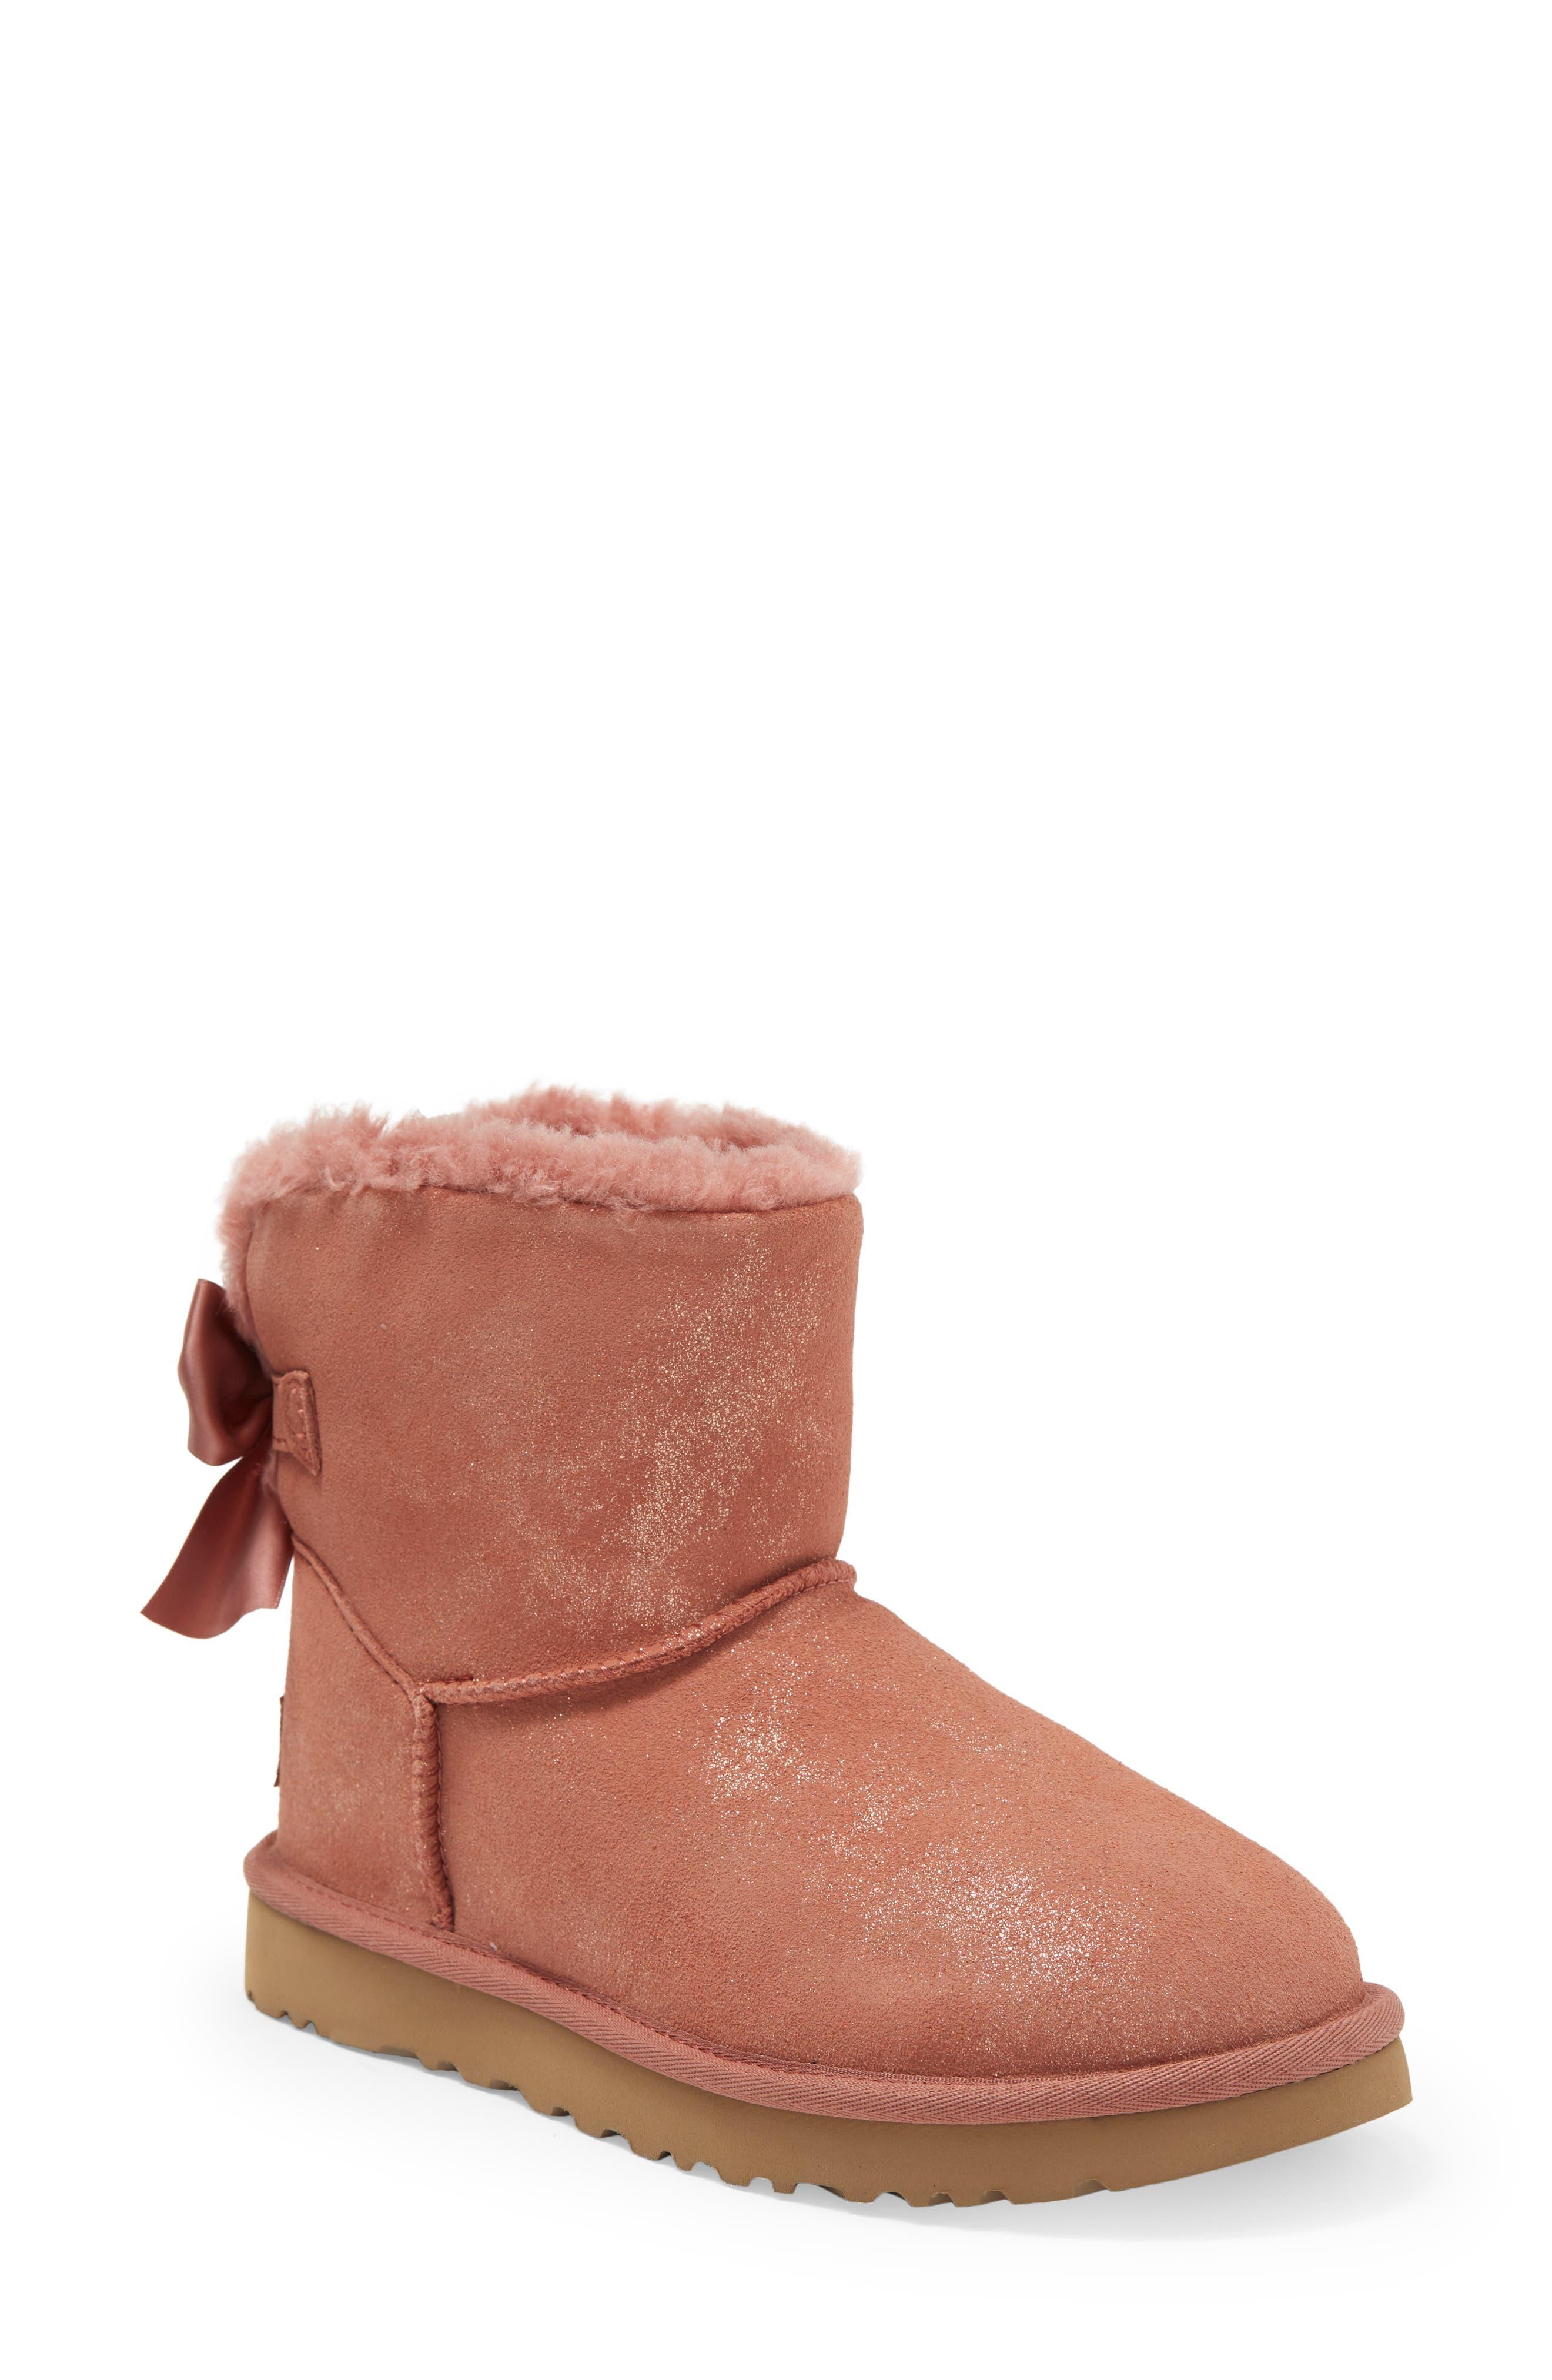 UGG Mini Bailey Bow Glimmer Faux Fur Lined Boot in Brown | Lyst